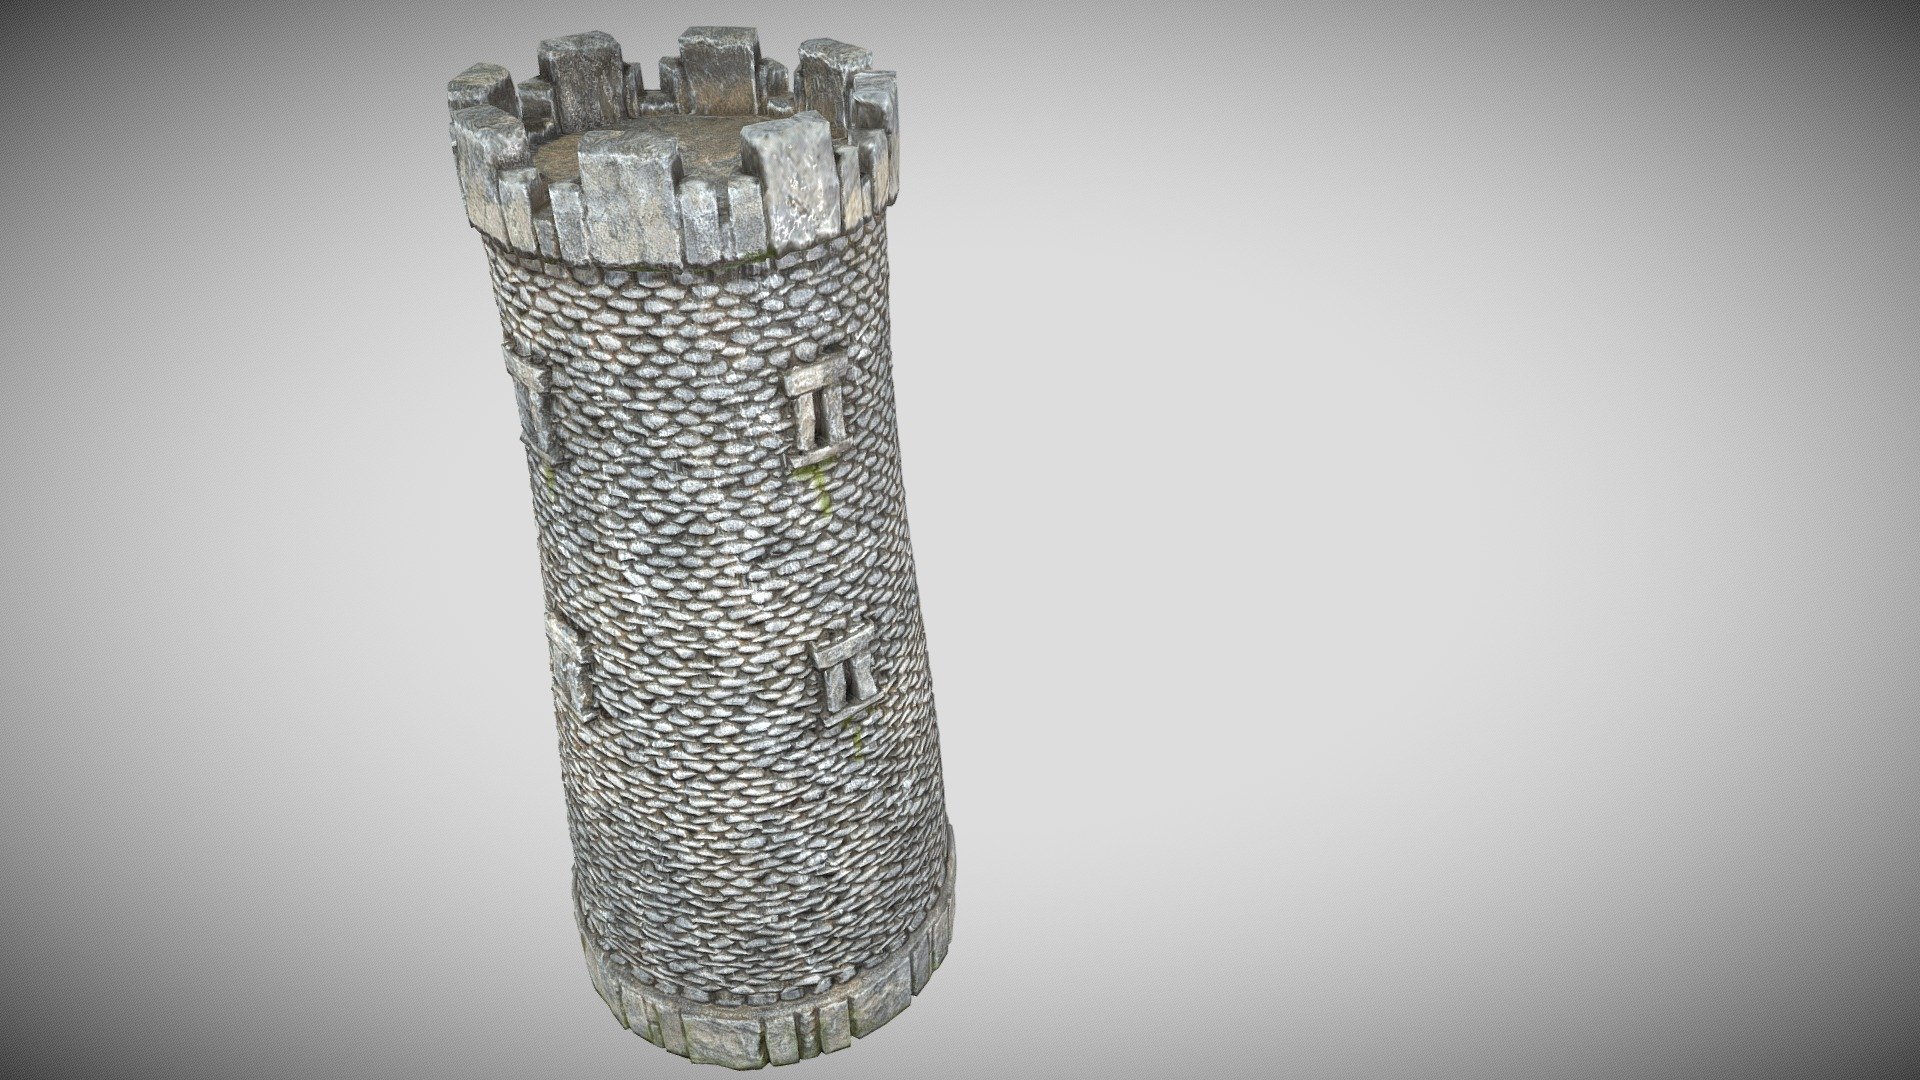 Presenting the low-poly 3D model file for the &ldquo;Castle Tower - Embattlement Fortress